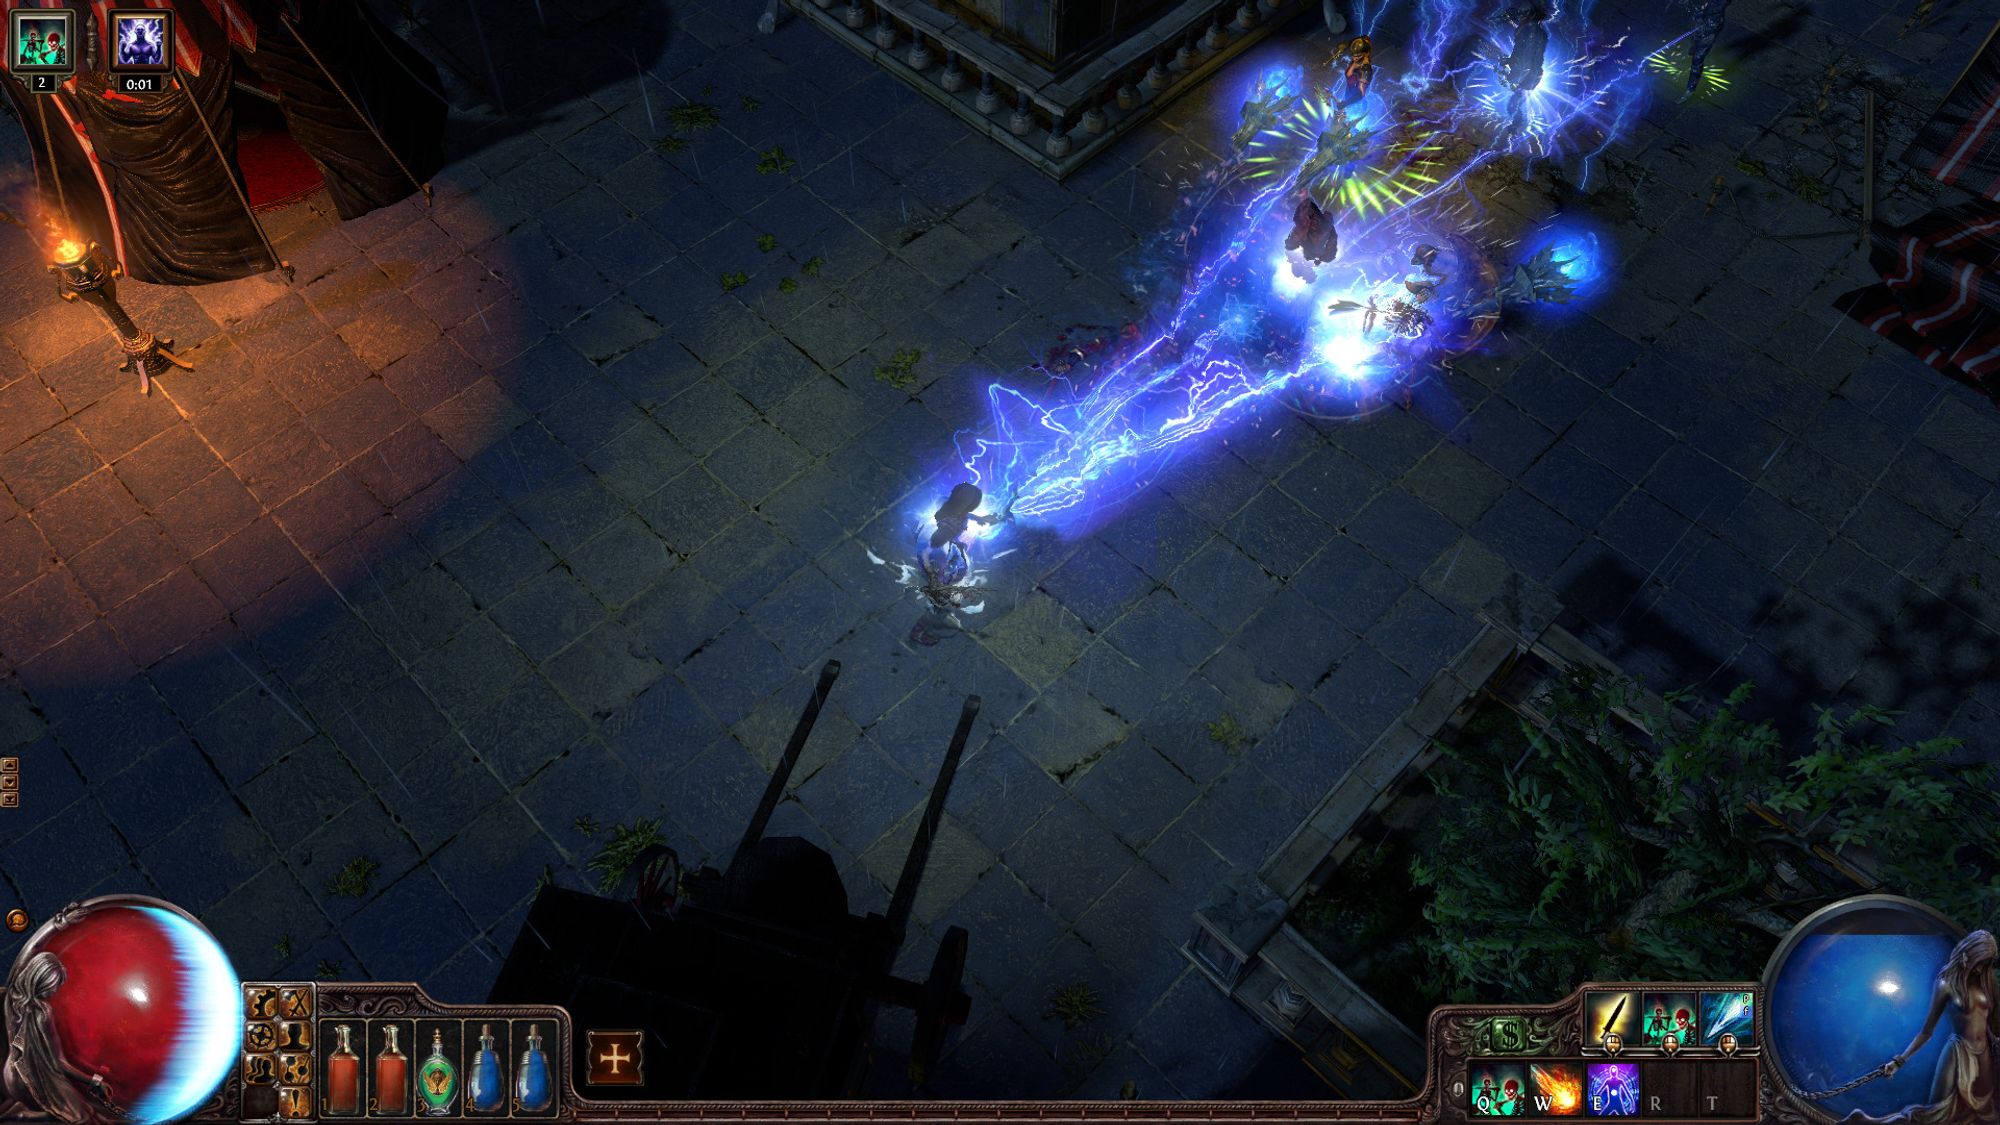 Ardor gaming exile. Path of Exile. Path of Exile 2. Path of Exile Review. Path of Exile screenshots.